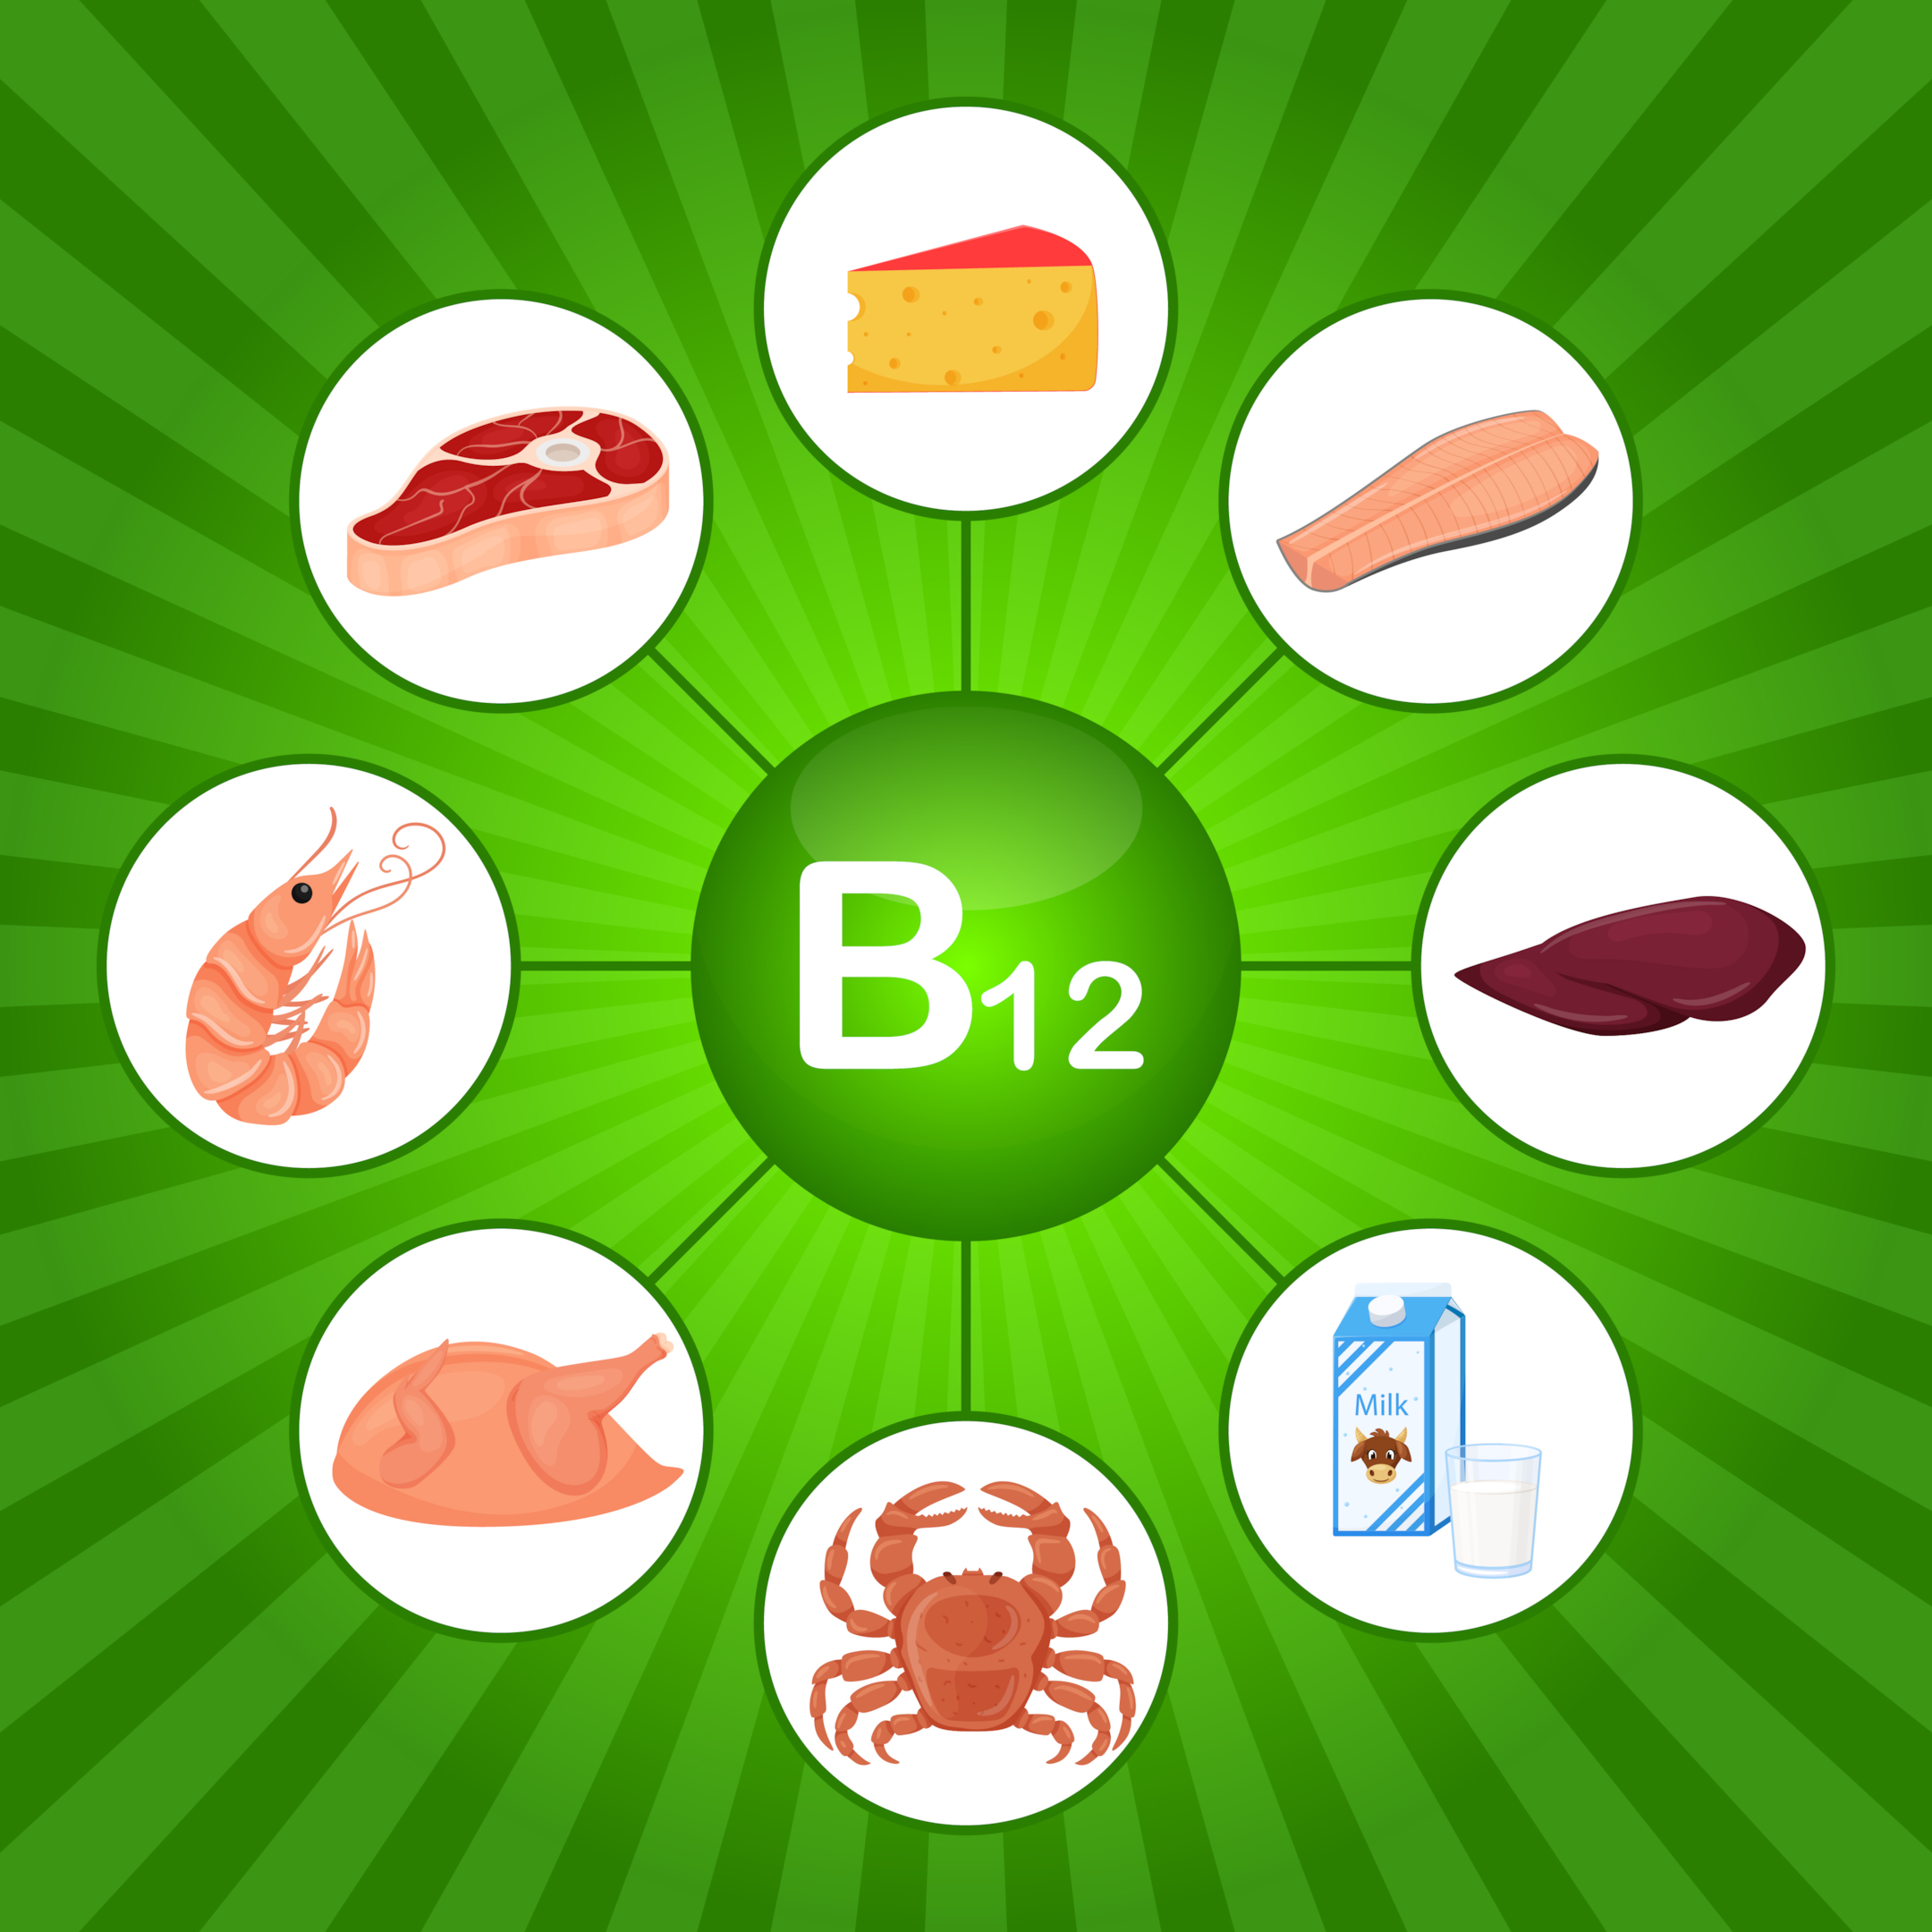 Vitamin B12 is found abundantly in many natural foods.